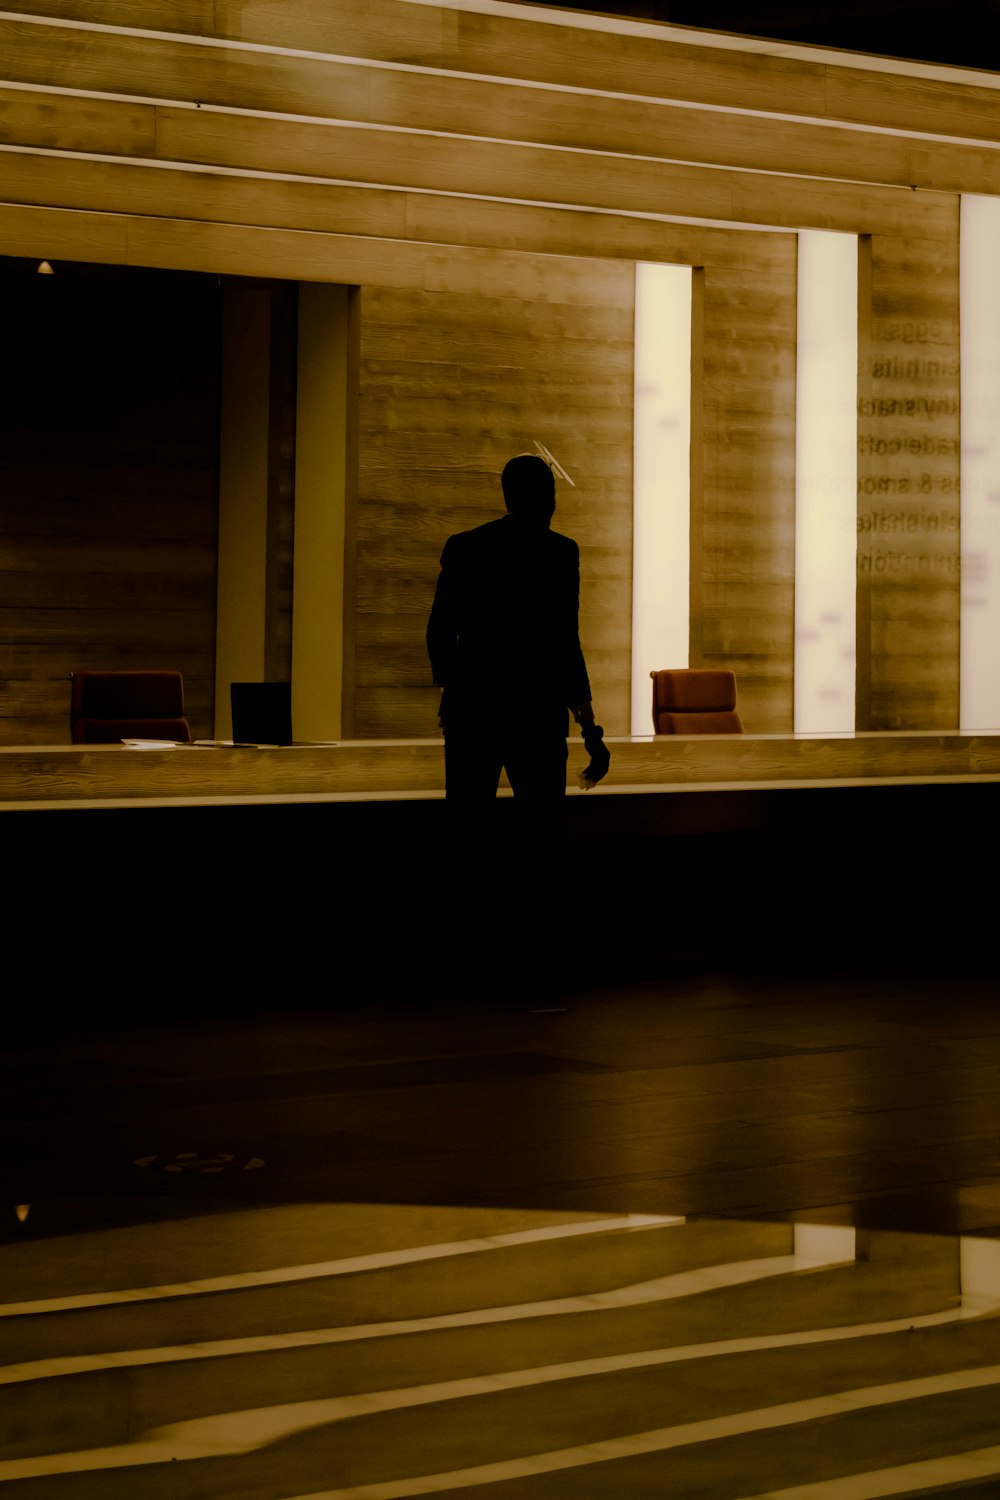 silhouette of person standing on hallway